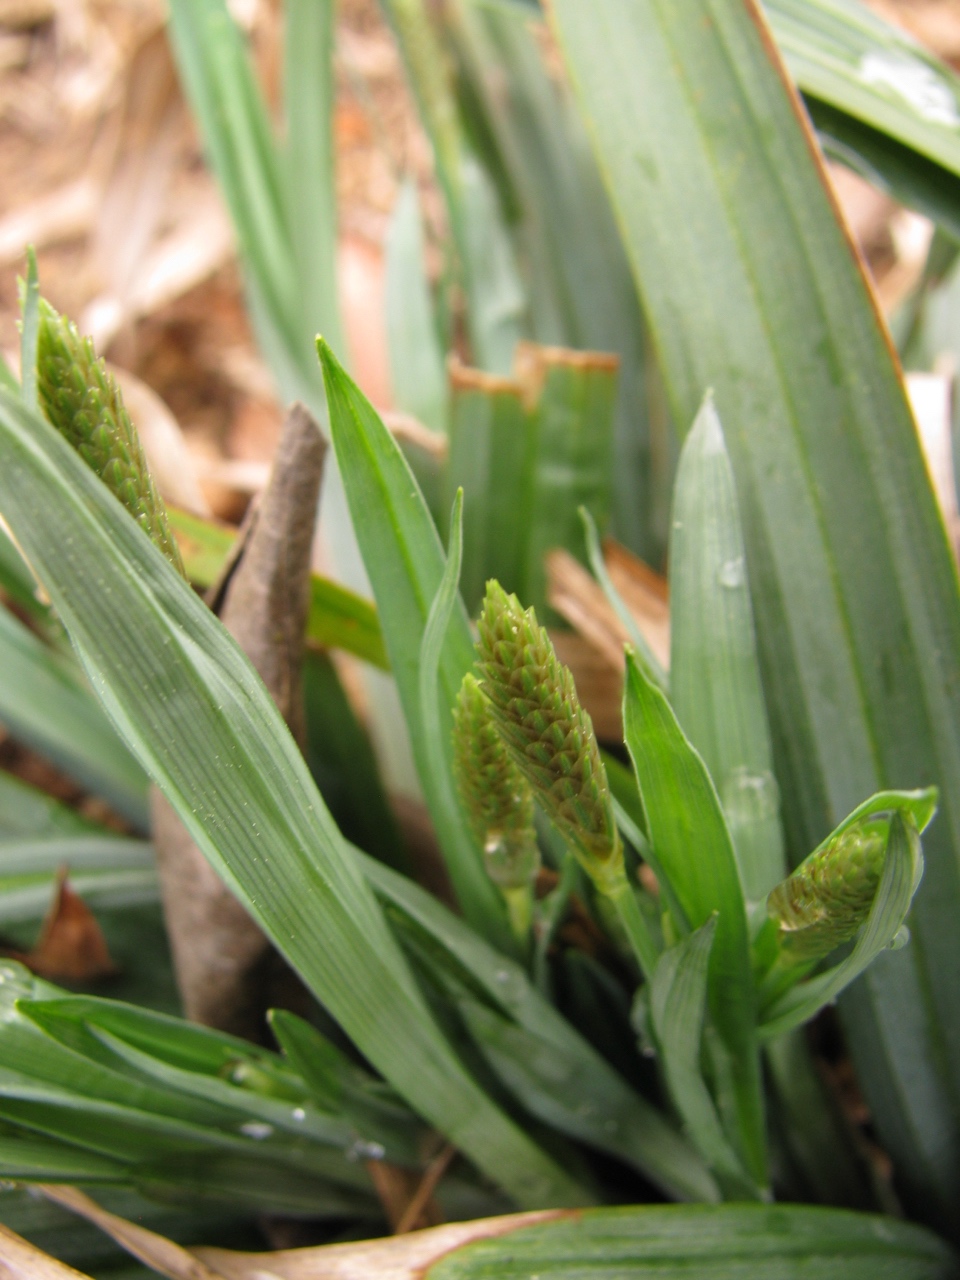 The Scientific Name is Carex platyphylla. You will likely hear them called Broadleaf Sedge, Silver Sedge. This picture shows the Emerging male spikelets in early April of Carex platyphylla